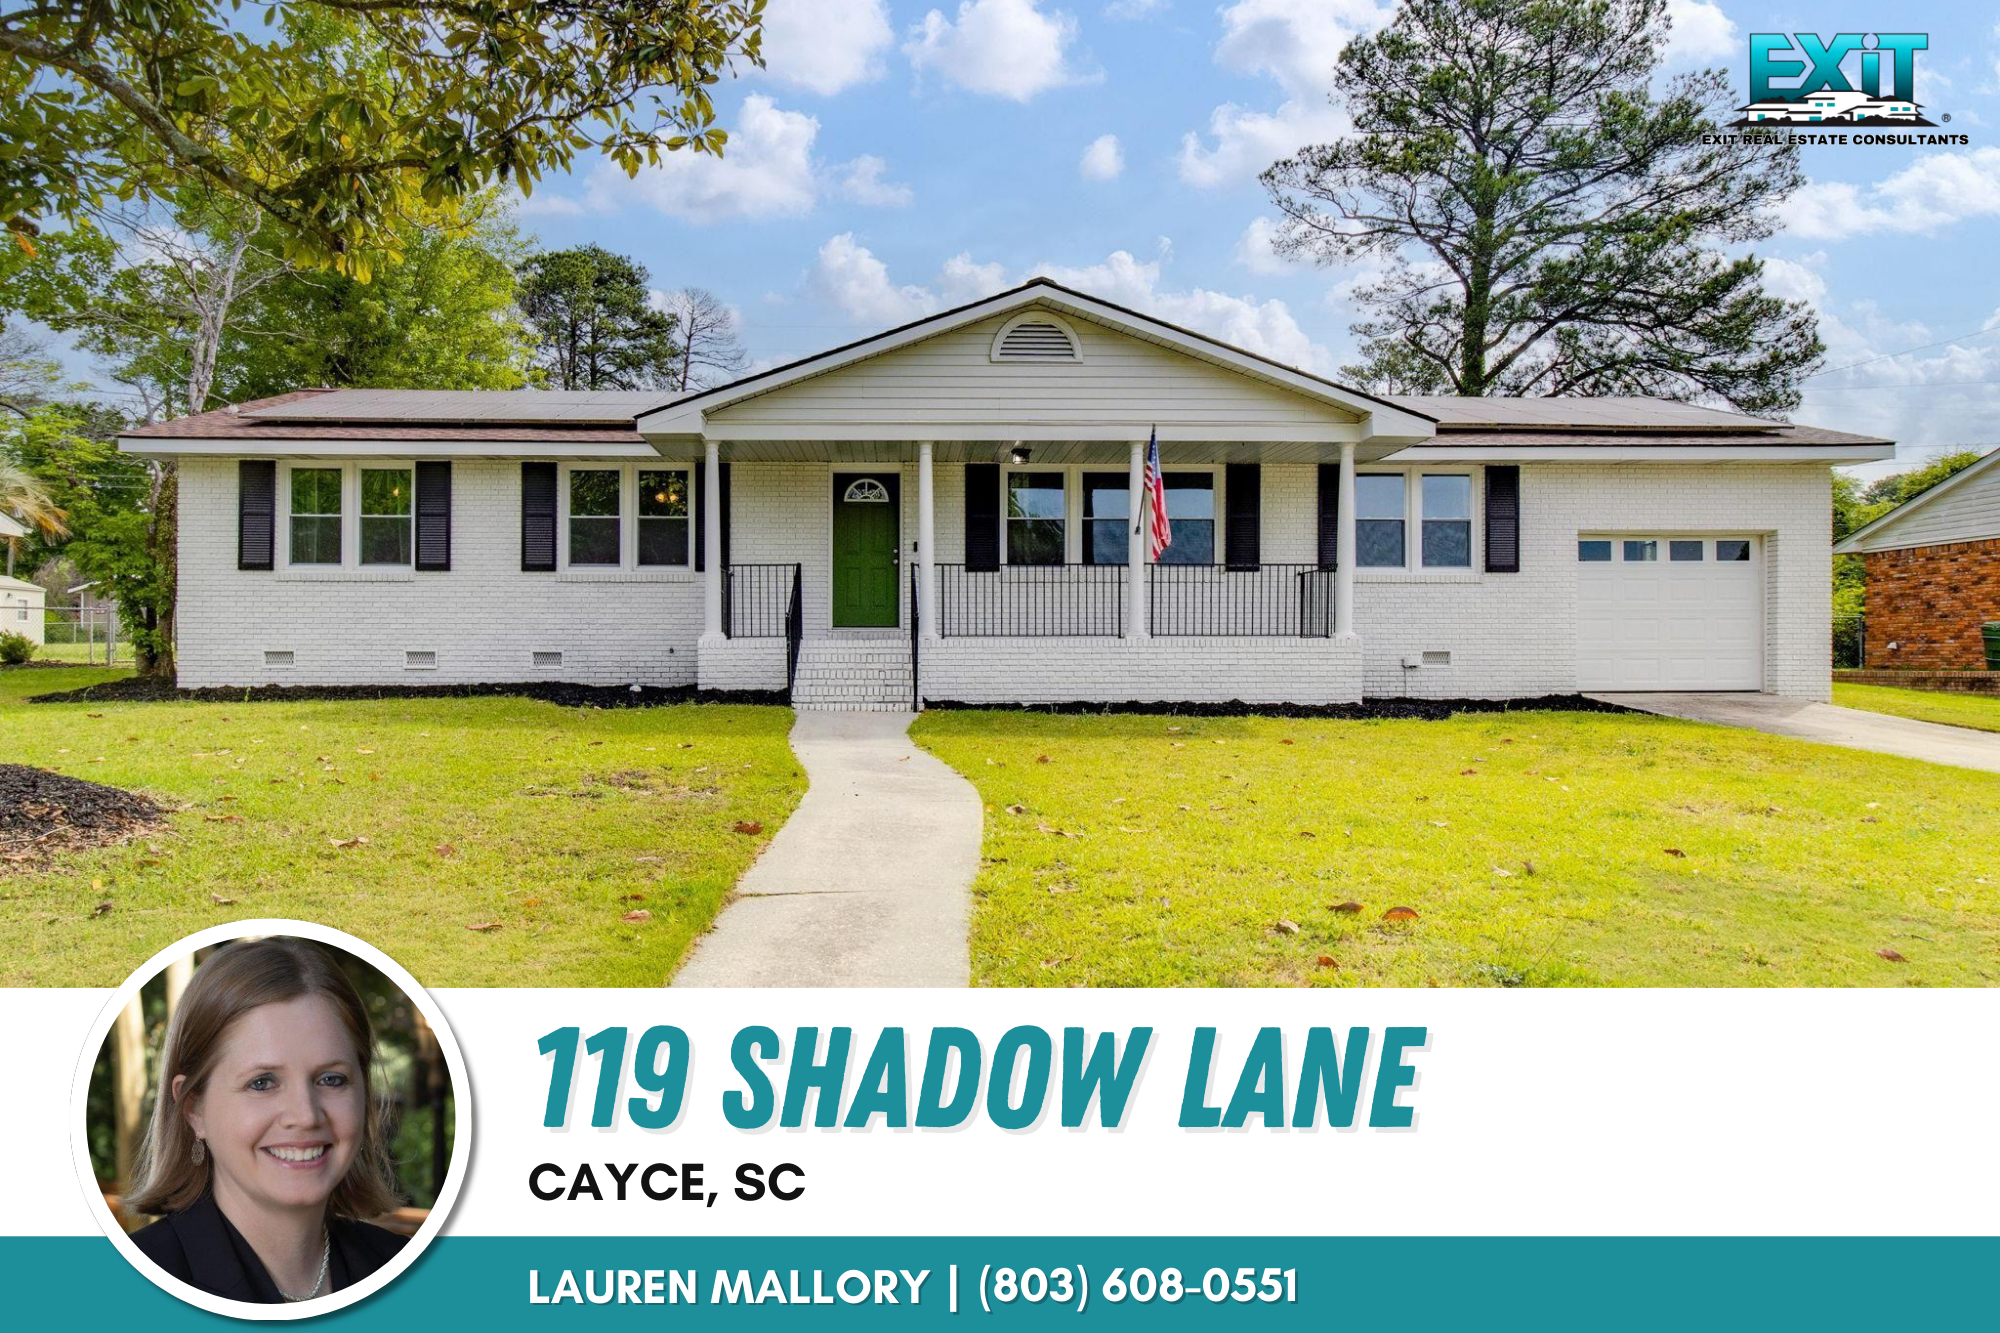 Just listed in Edenwood - Cayce